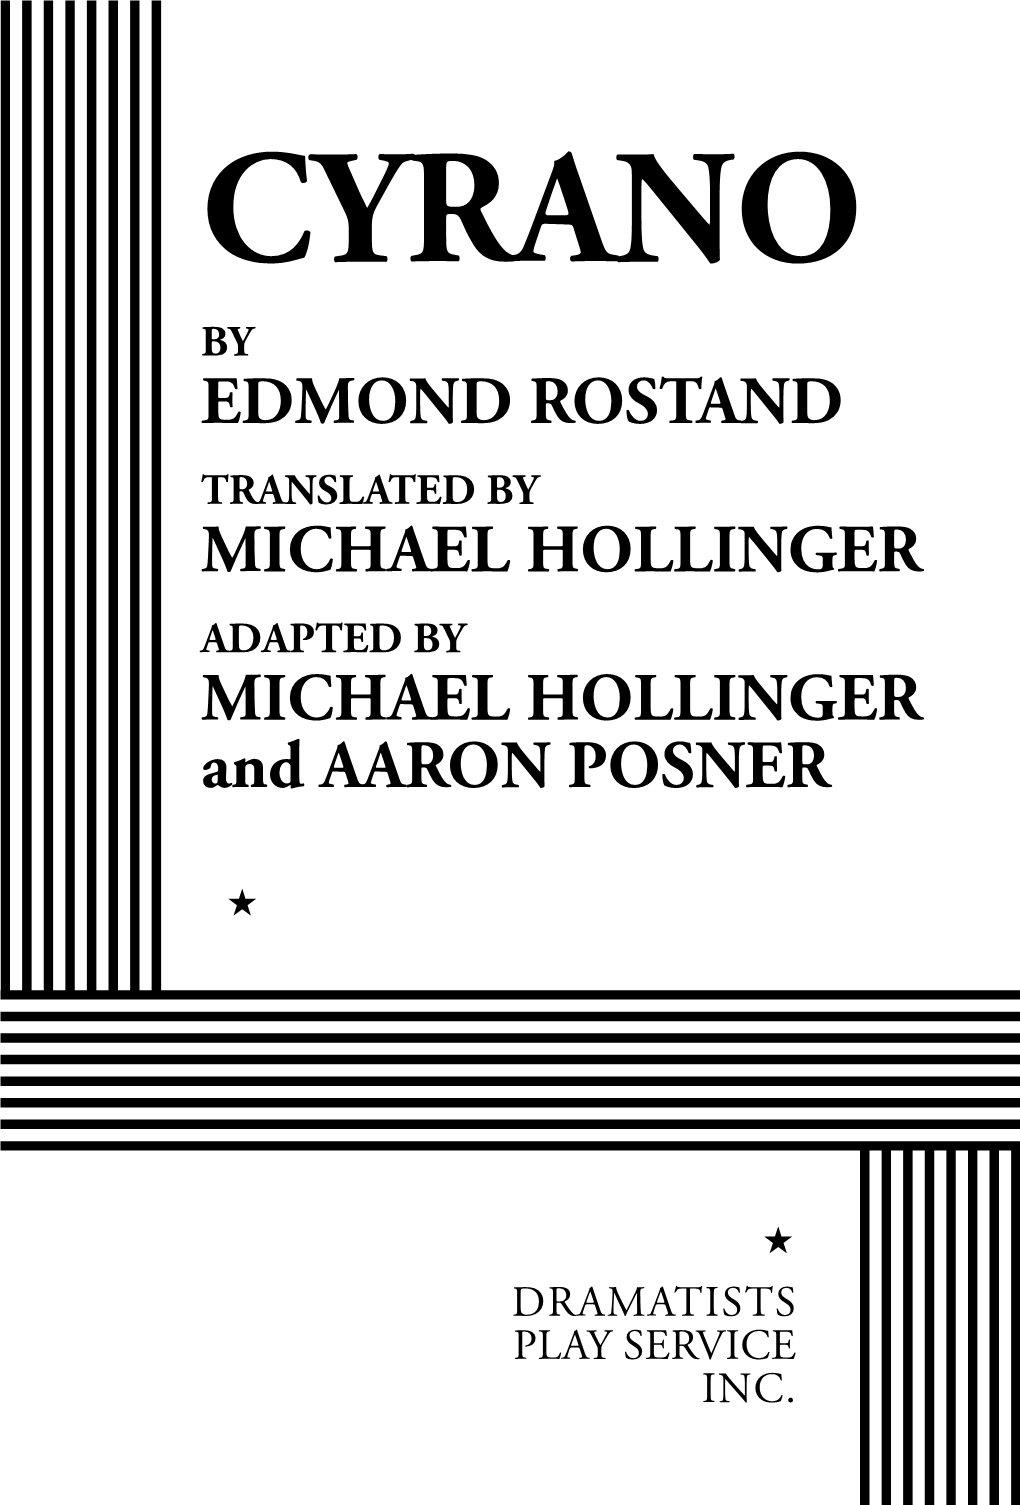 CYRANO by EDMOND ROSTAND TRANSLATED by MICHAEL HOLLINGER ADAPTED by MICHAEL HOLLINGER and AARON POSNER